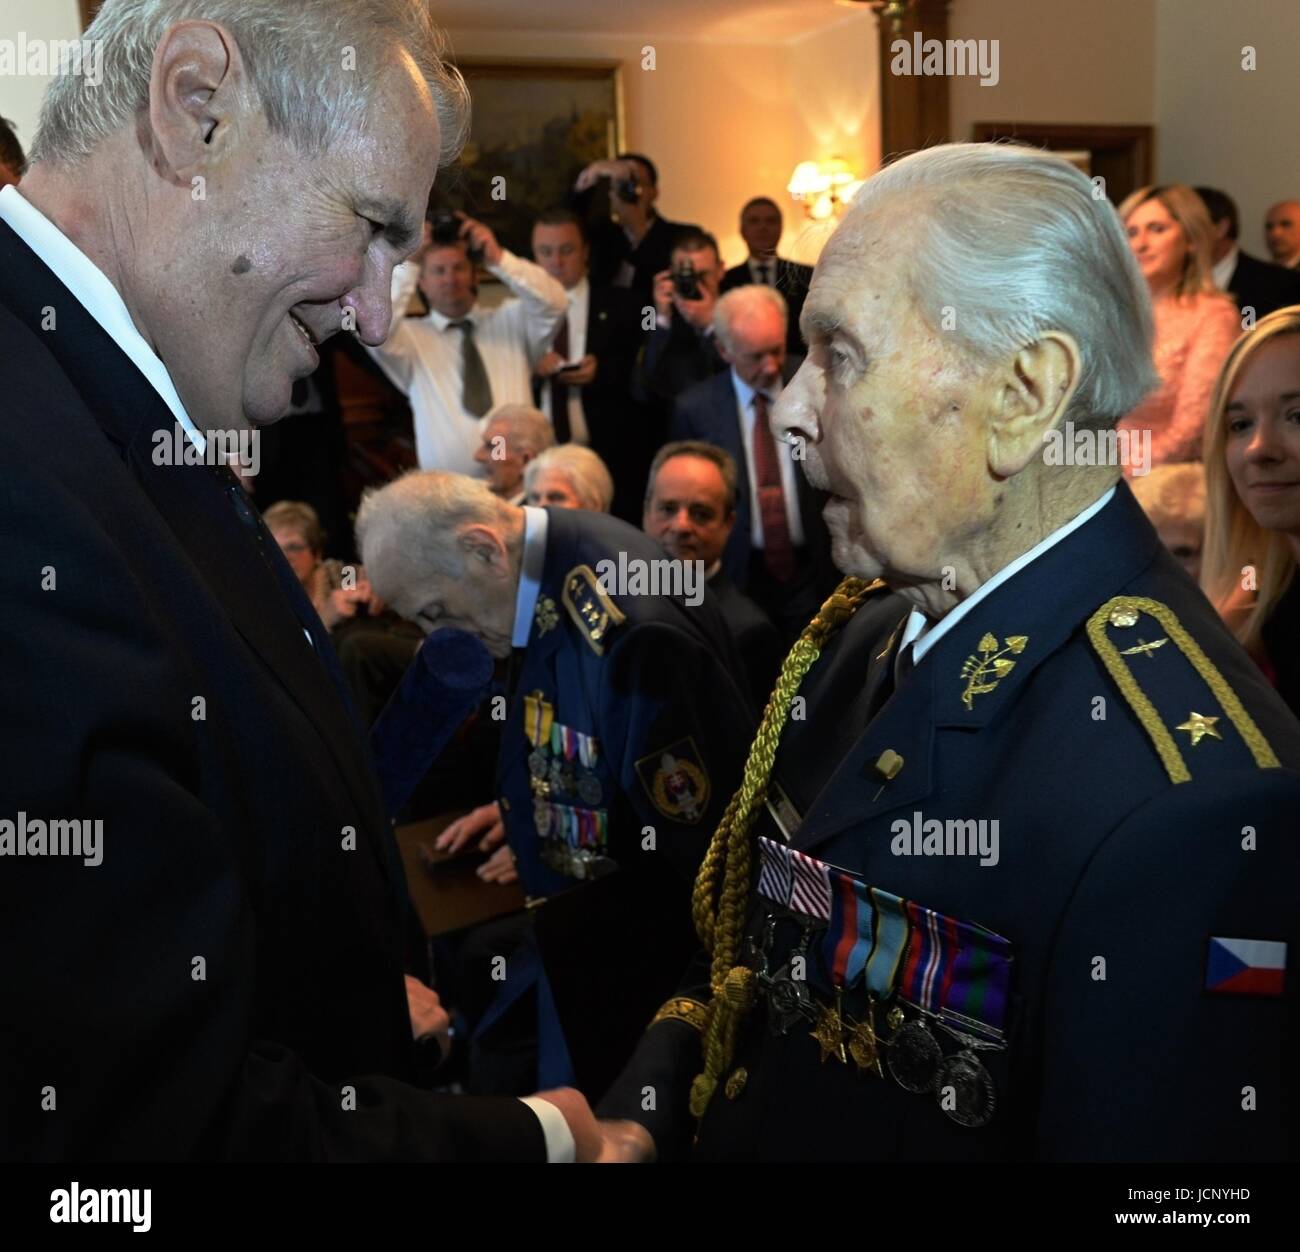 London, UK. 16th June, 2017. President Milos Zeman (left) gave medals to several Czech and Slovak veterans who served in the RAF during World War Two at the Czech embassy in London today. He also gave a diploma on the promotion to the rank of general to Miroslav Liskutin (right), 97. Credit: Jakub Dospiva/CTK Photo/Alamy Live News Stock Photo